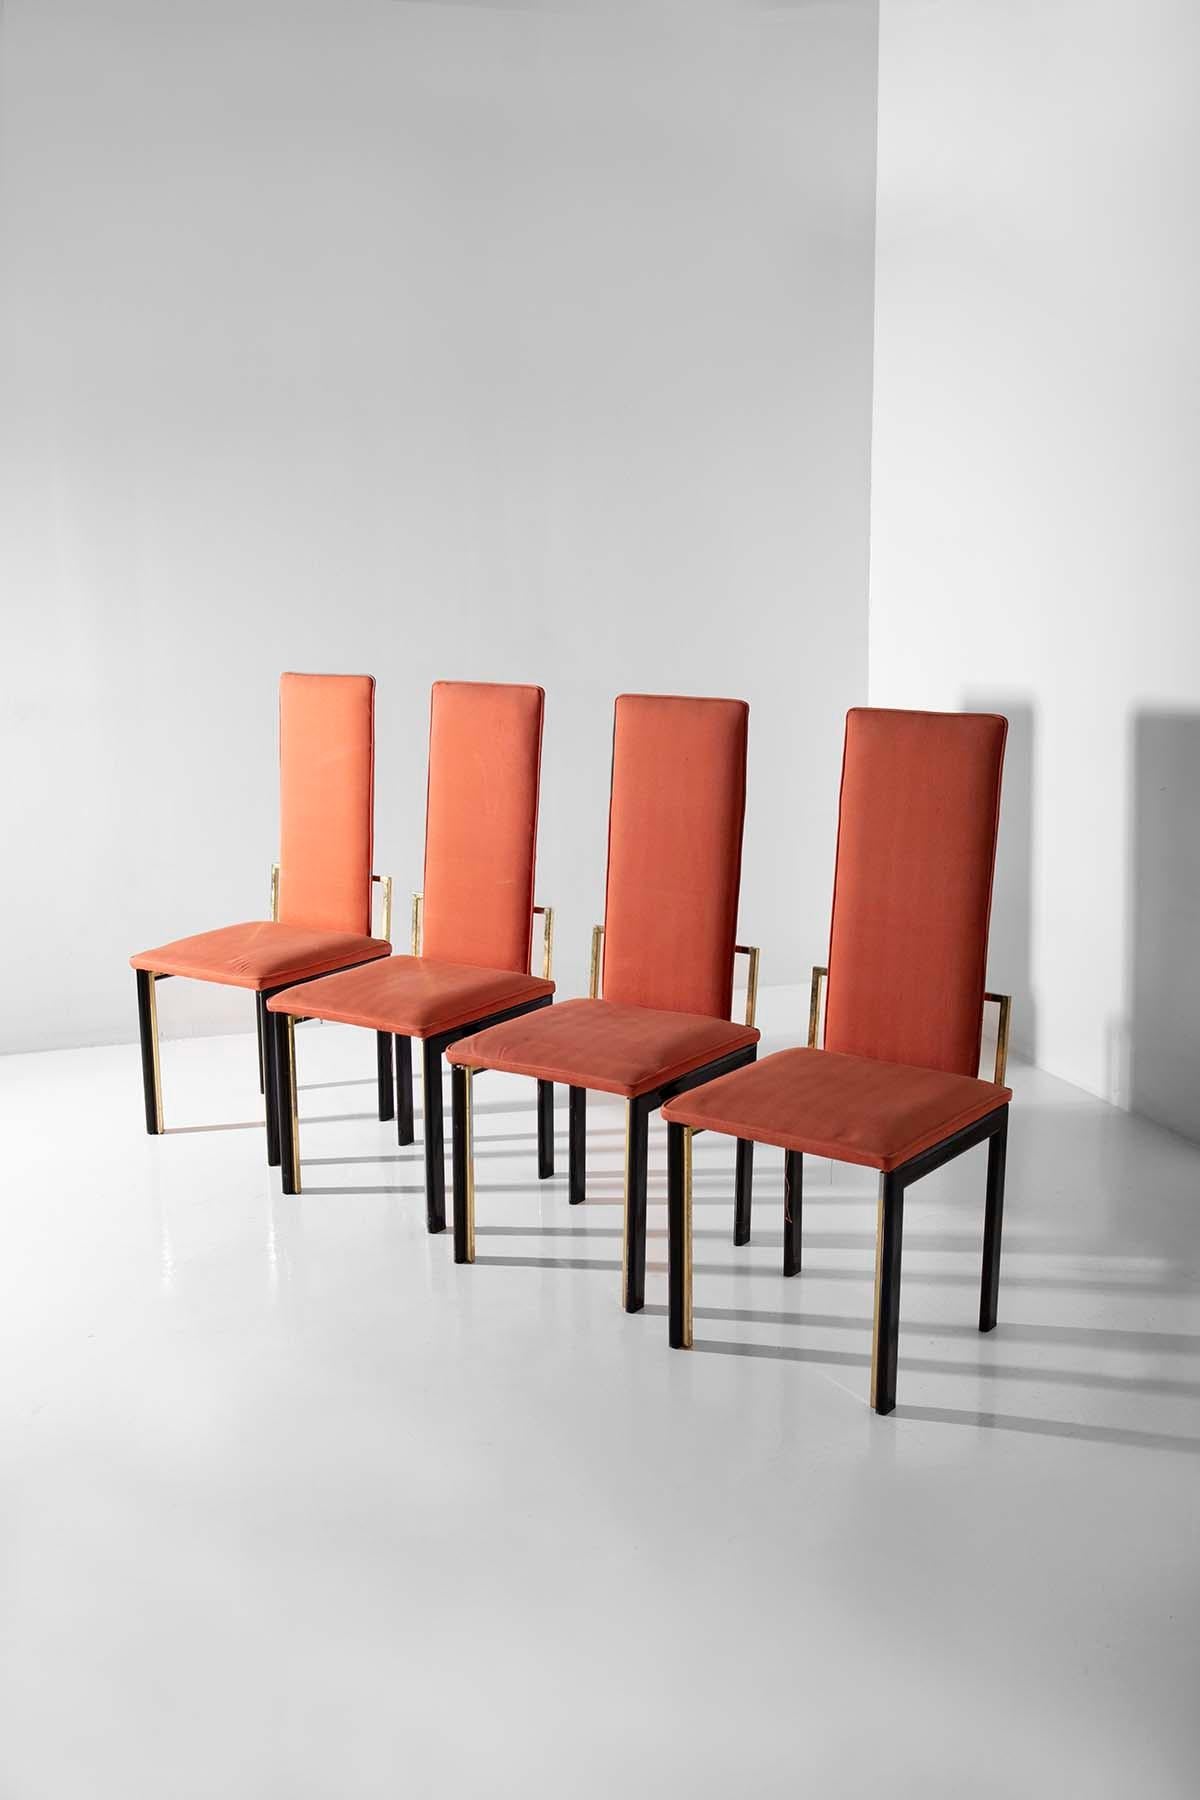 This charming set of four vintage Italian chairs captures the free-spirited and innovative essence of the 1970s. Bathed in the warm and vibrant shades of salmon orange, these chairs stand out for their cotton fabric with a refined texture